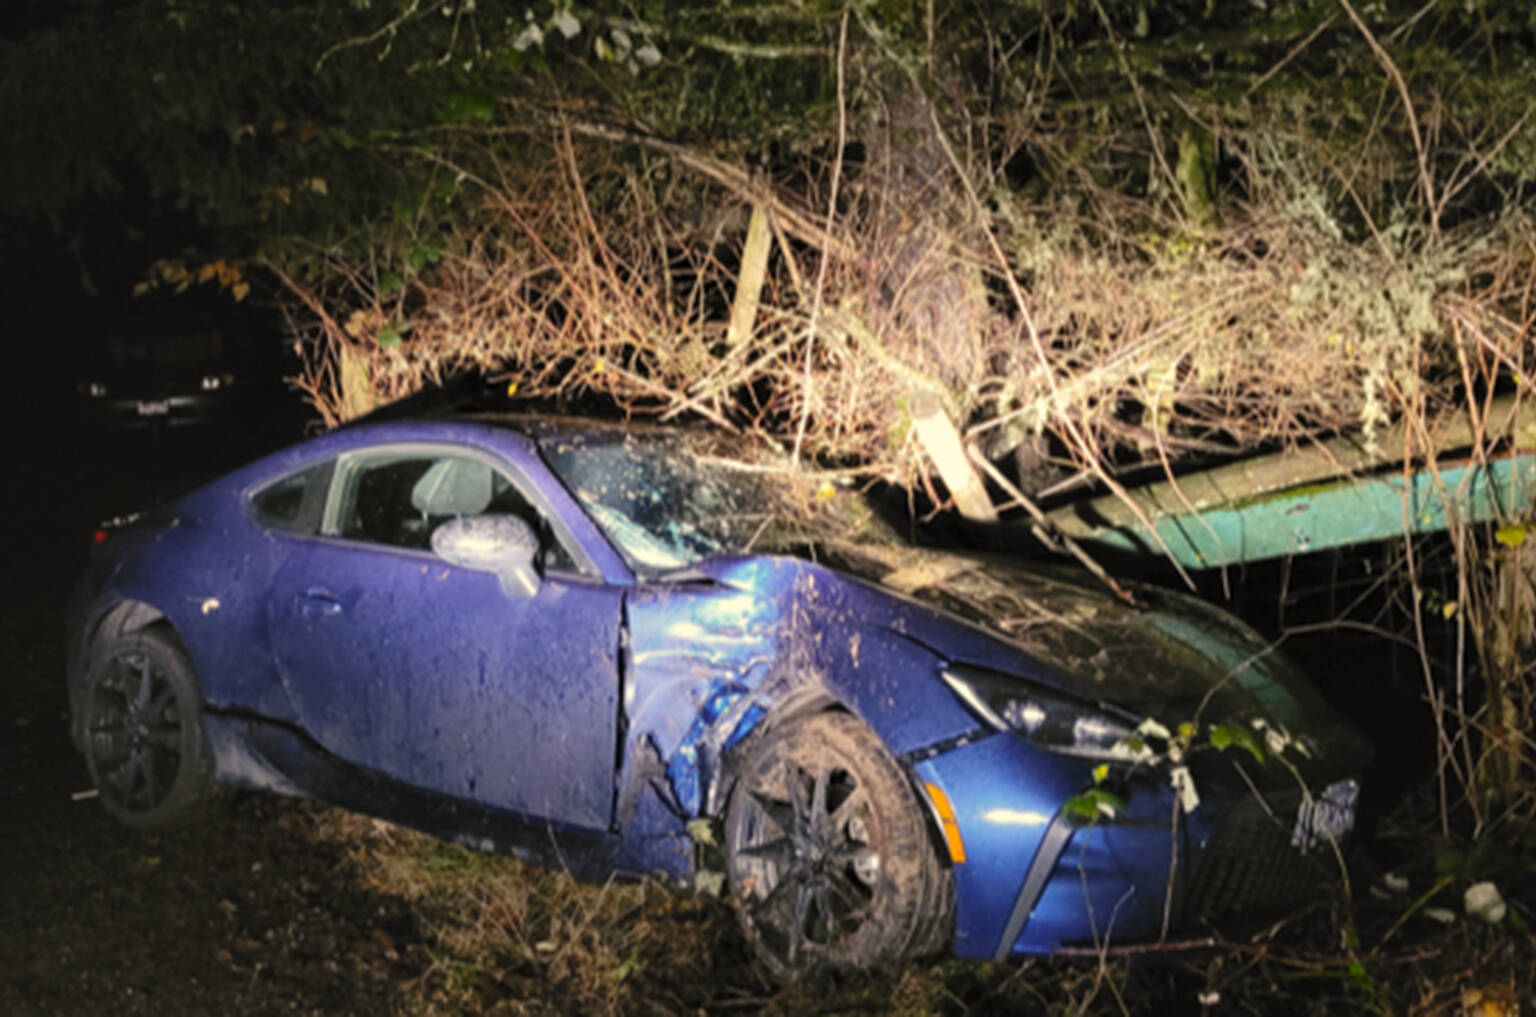 The aftermath of an accident has taken a toll on the daily life of a Sooke family. (Contributed - Jozsef Gurlay)